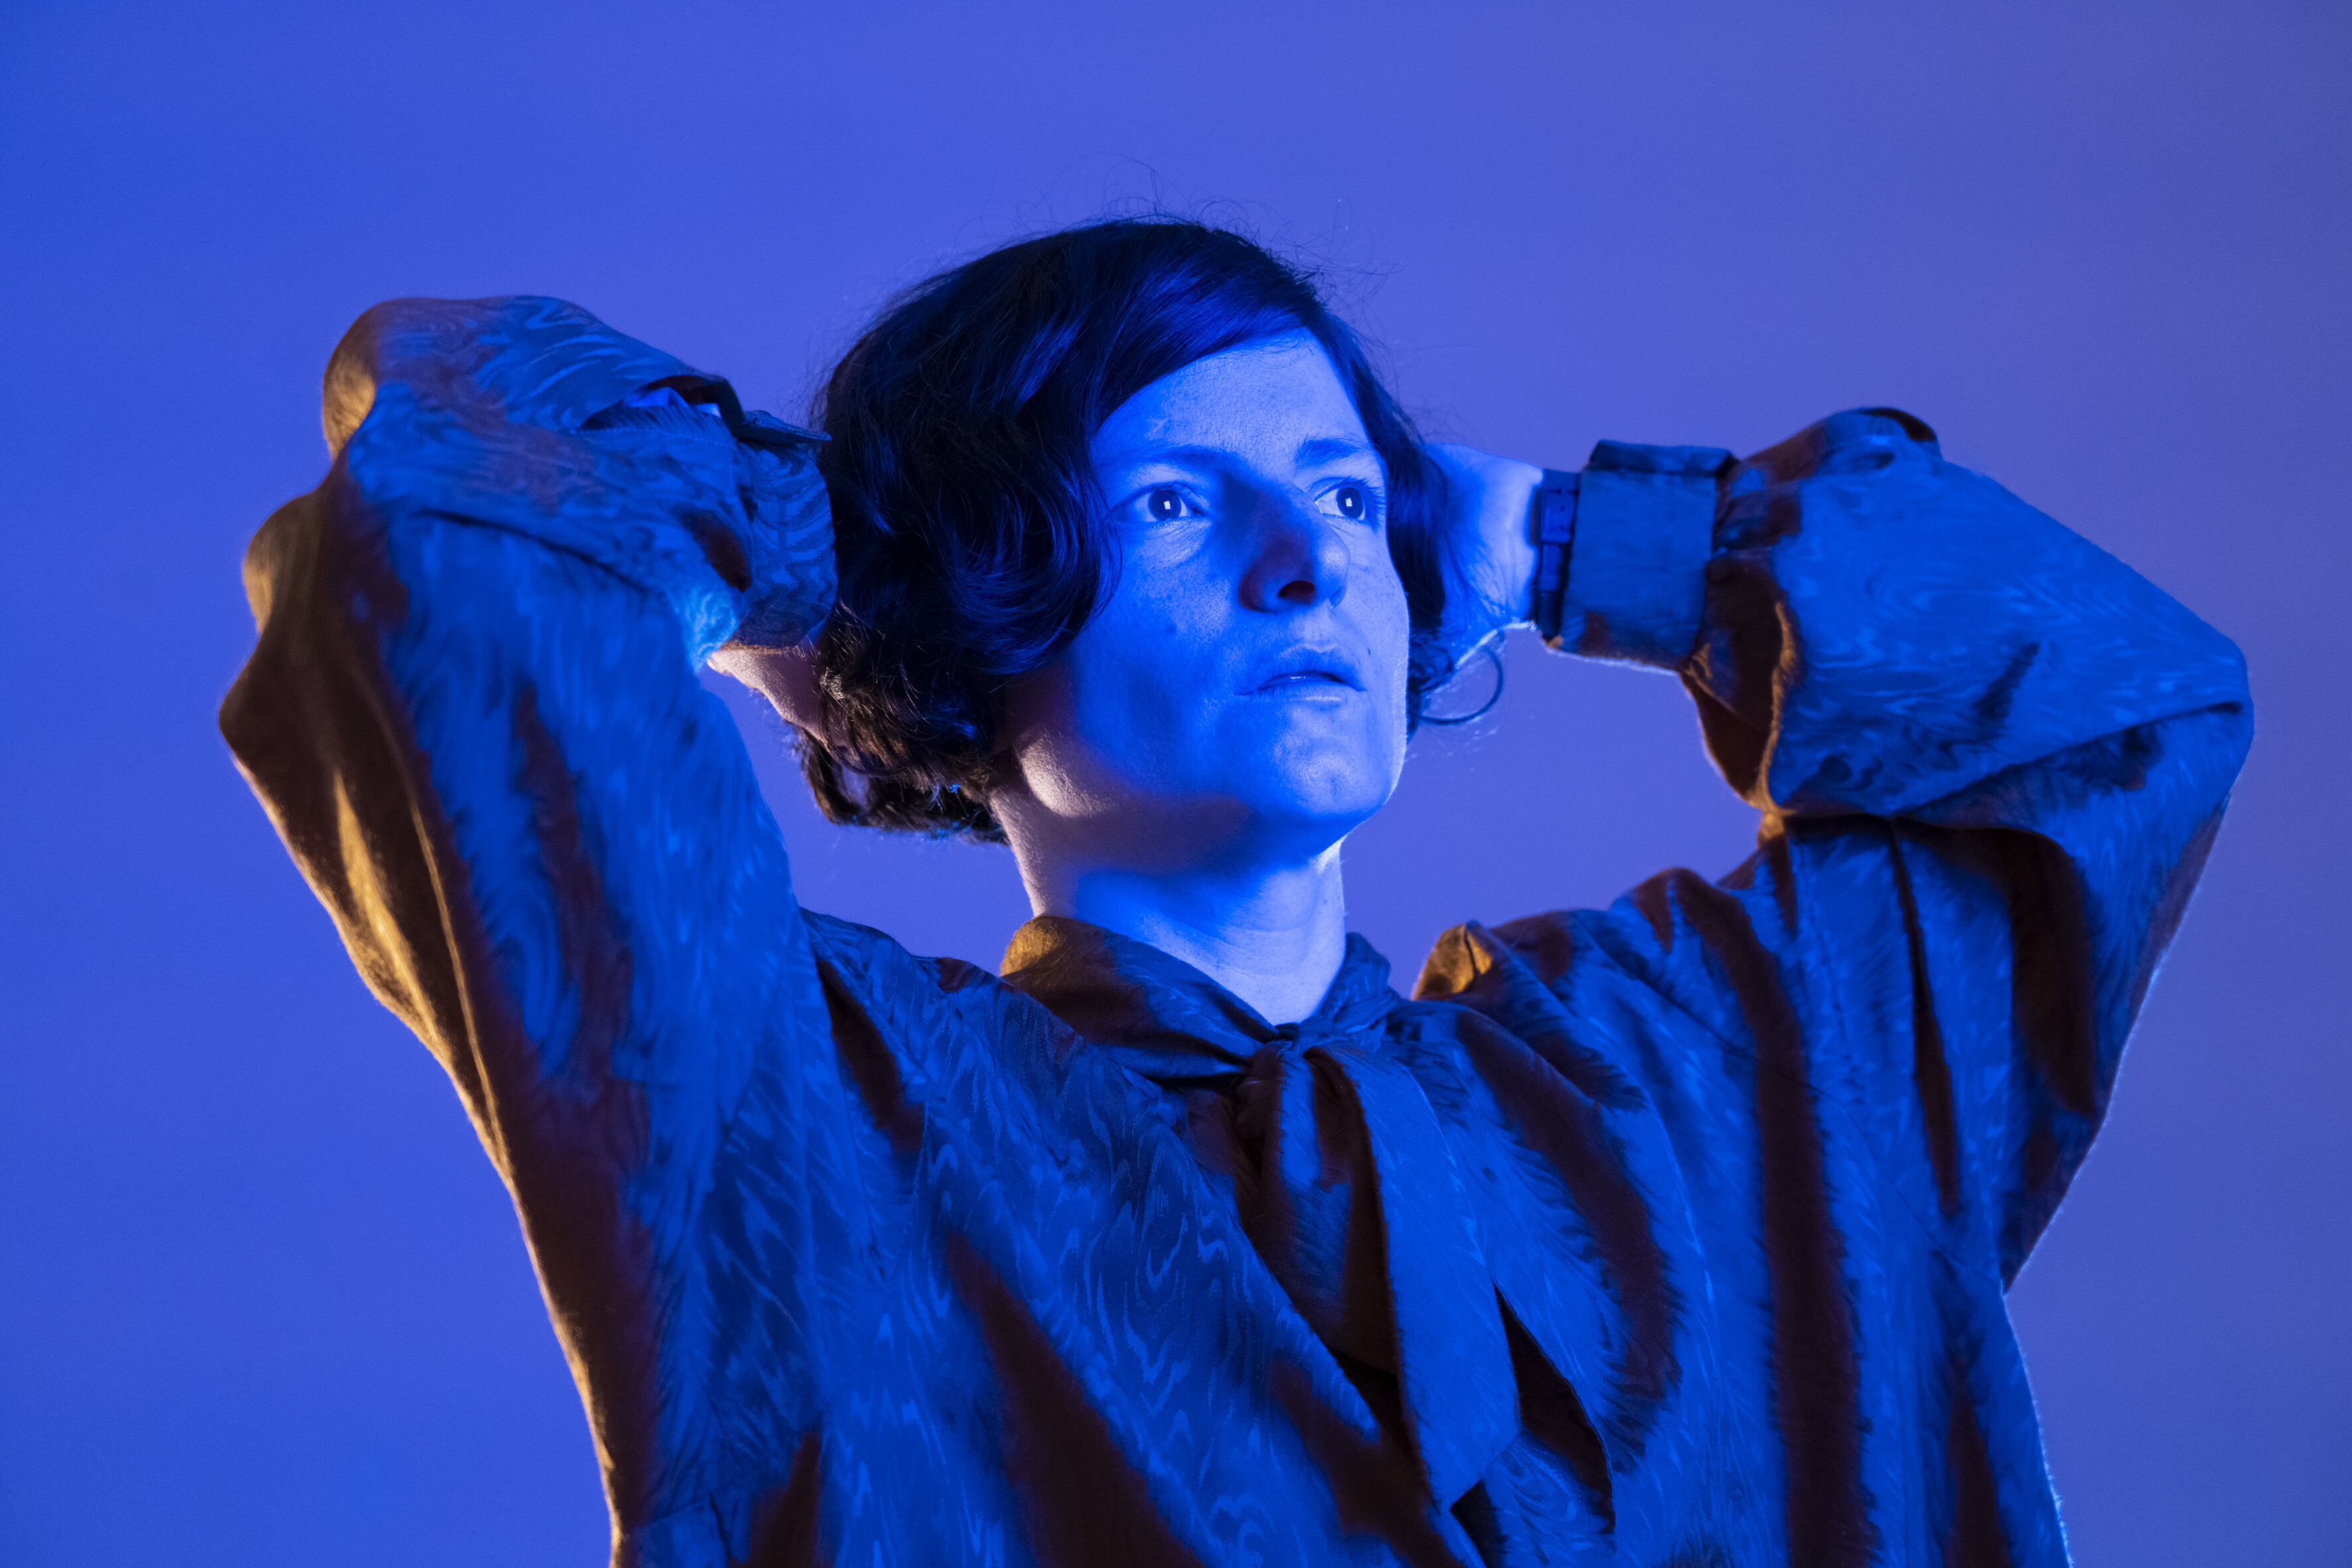 This image shows a close-up of a person surrounded by blue light. The person is holding the hands behind the head and is looking away from the camera.